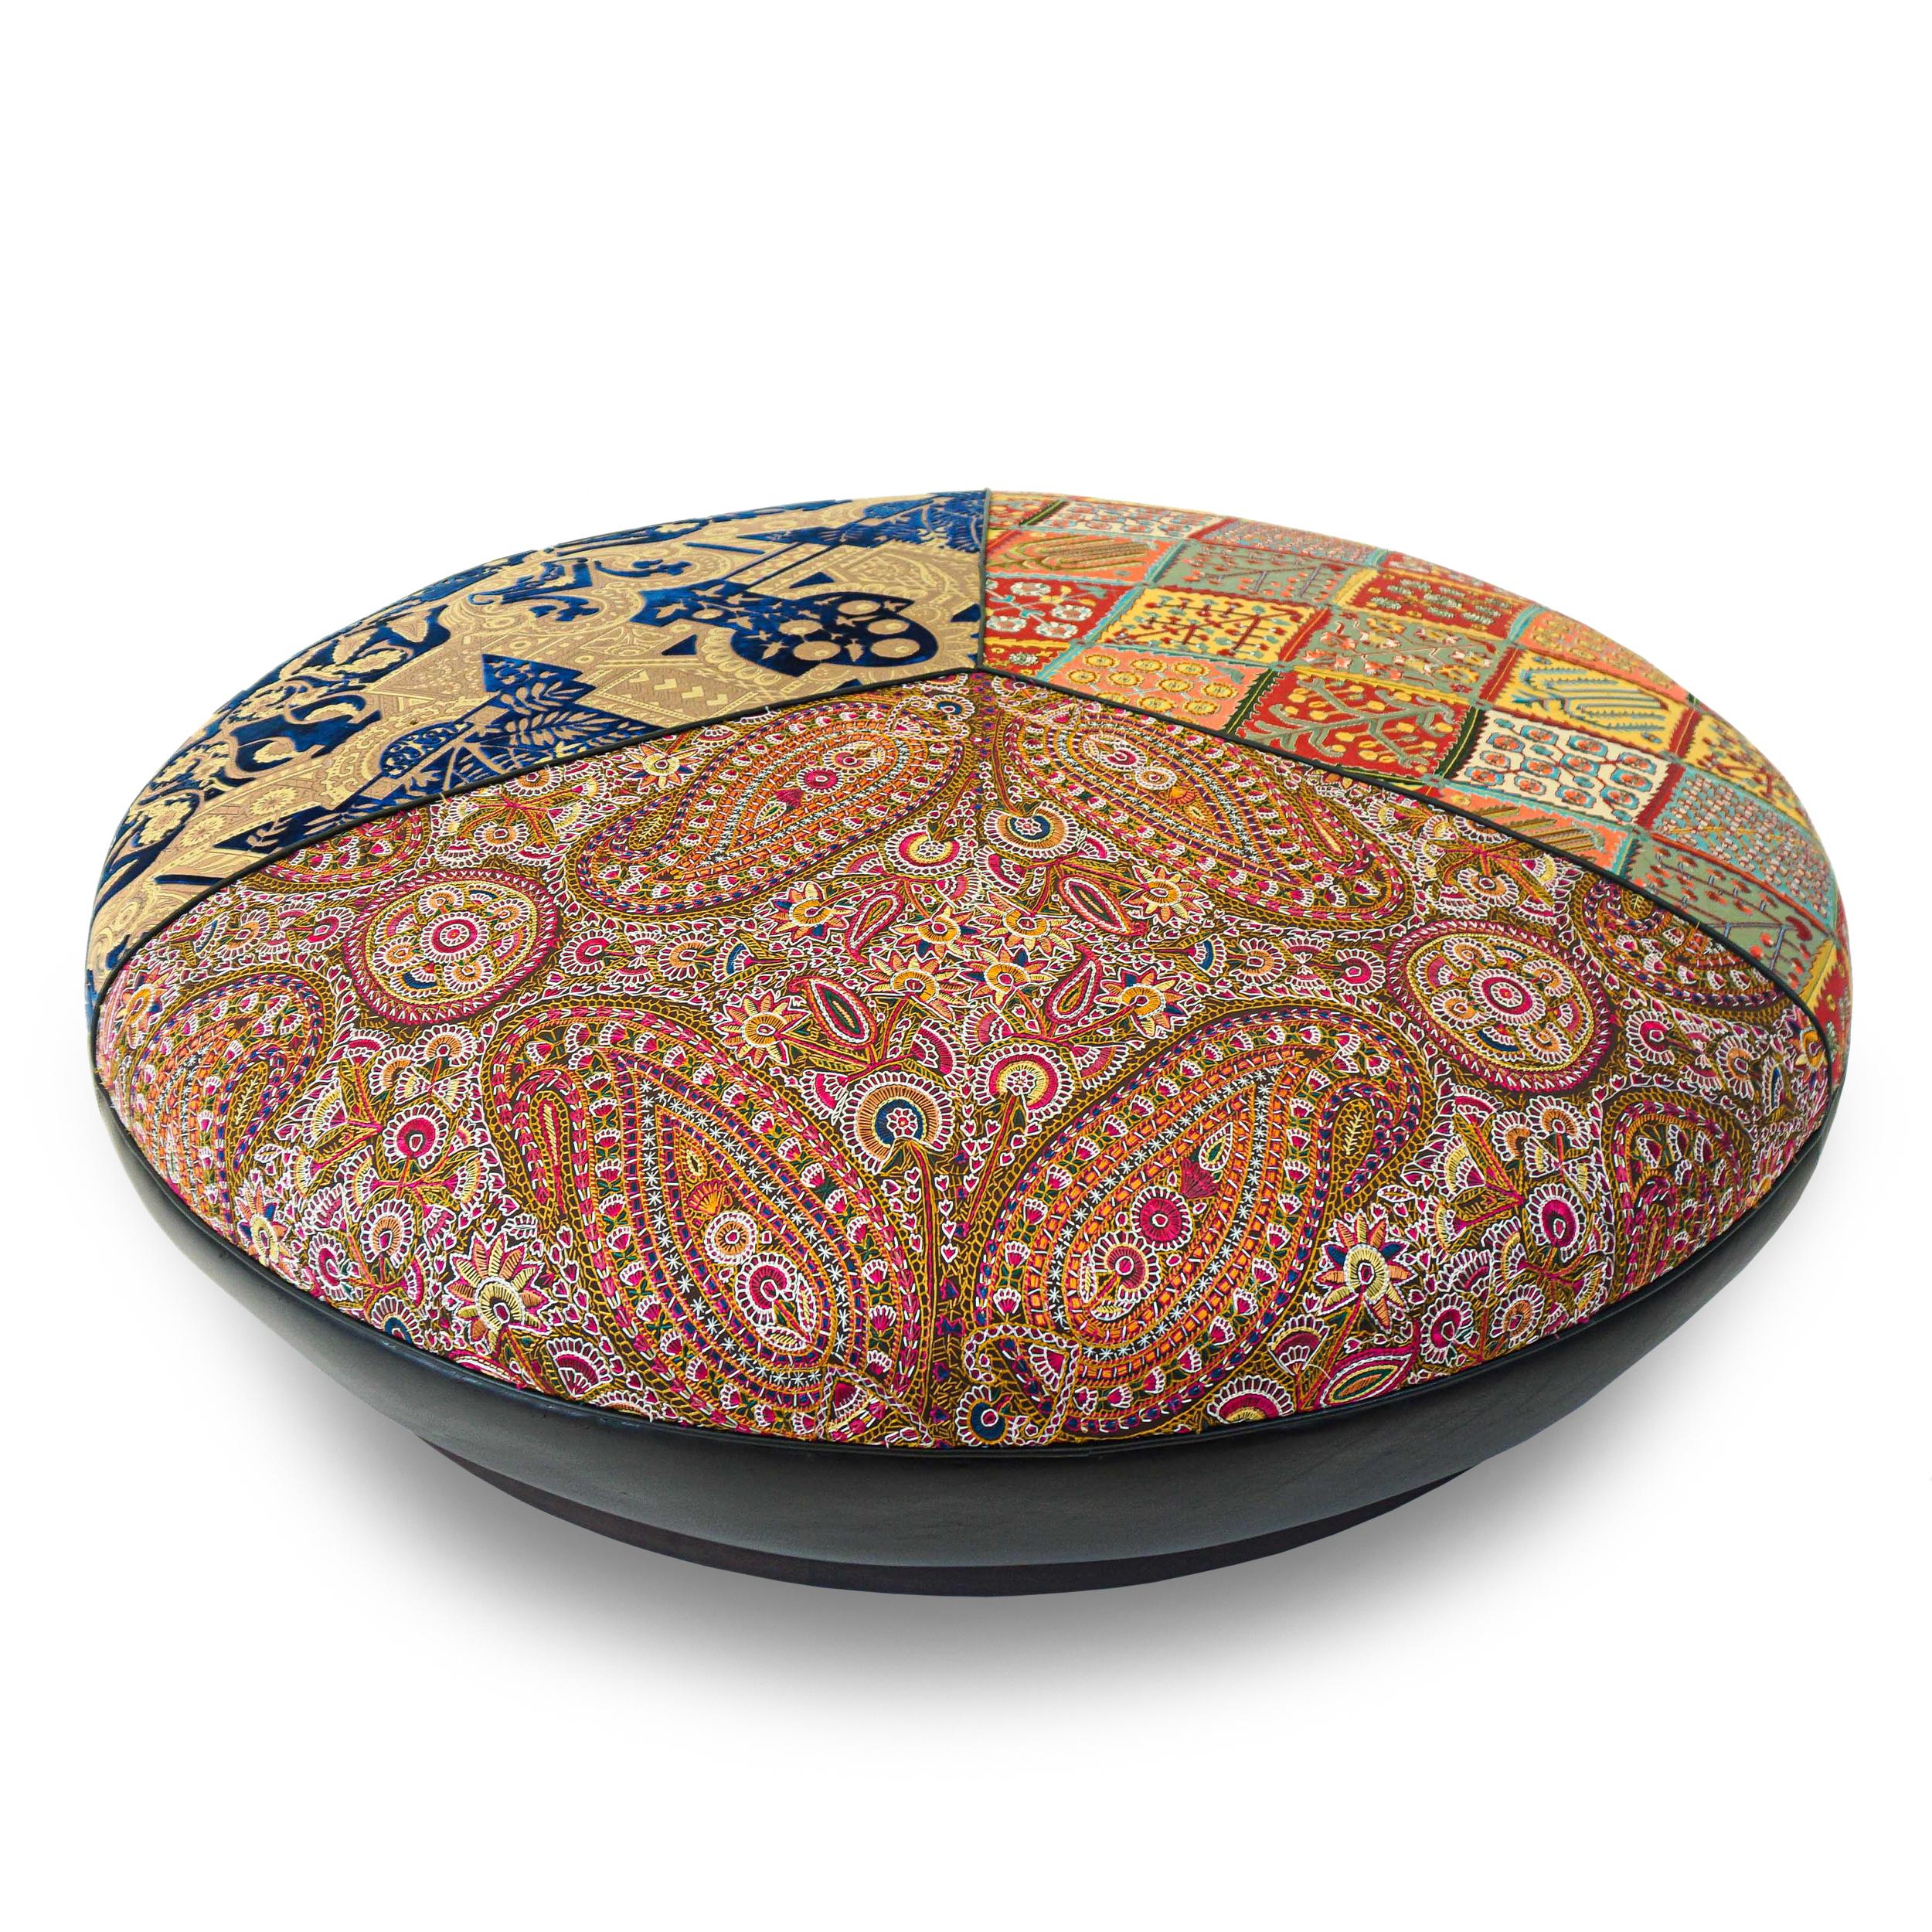 Large Round Upholstered Moroccan-Inspired Ottoman, Customizable For Sale 3